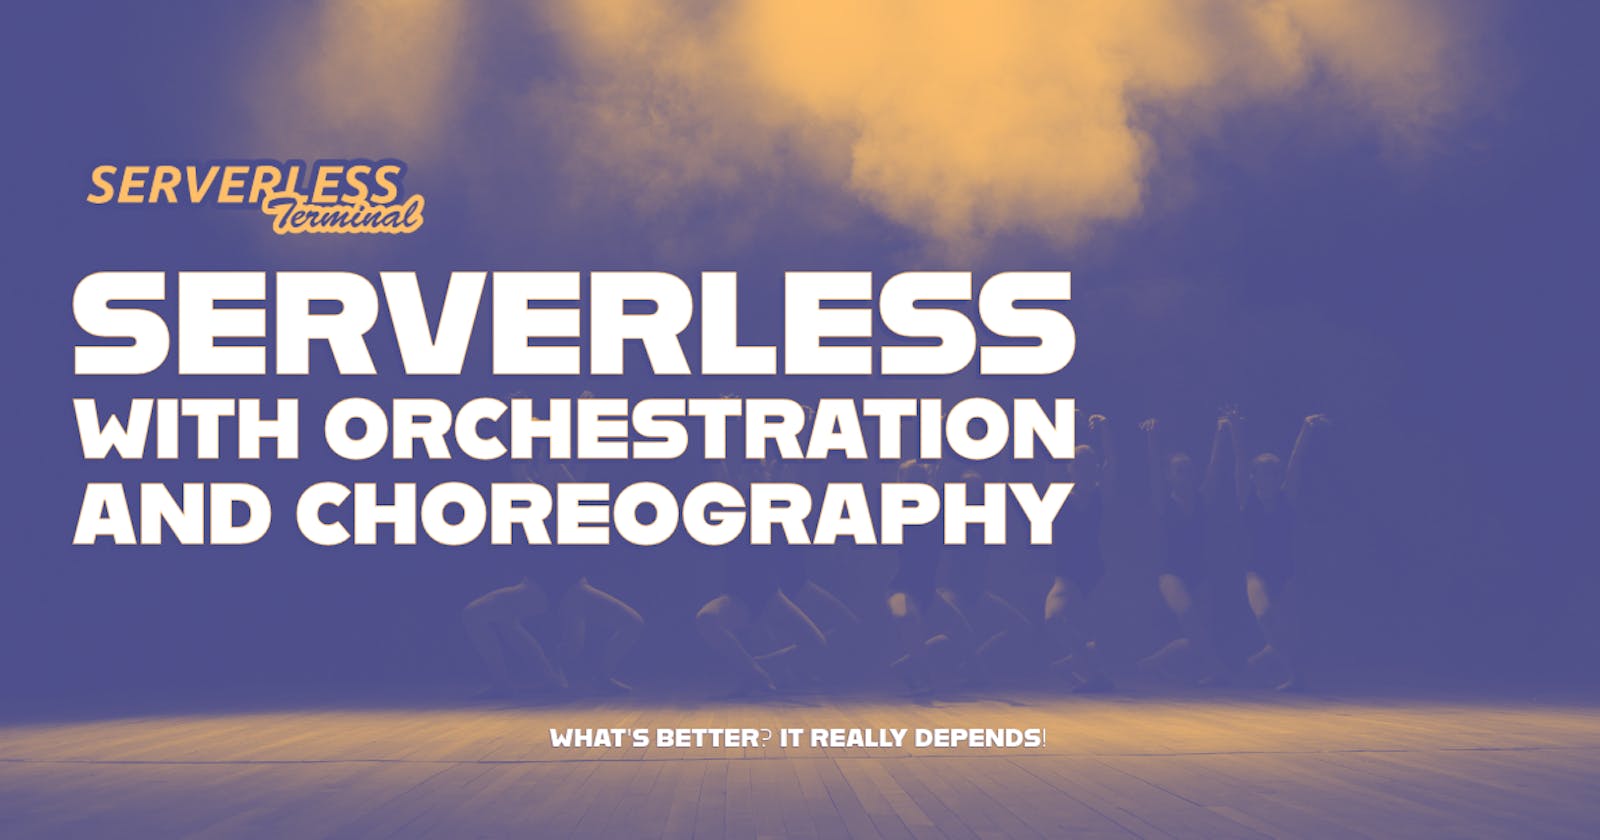 Serverless with orchestration and choreography